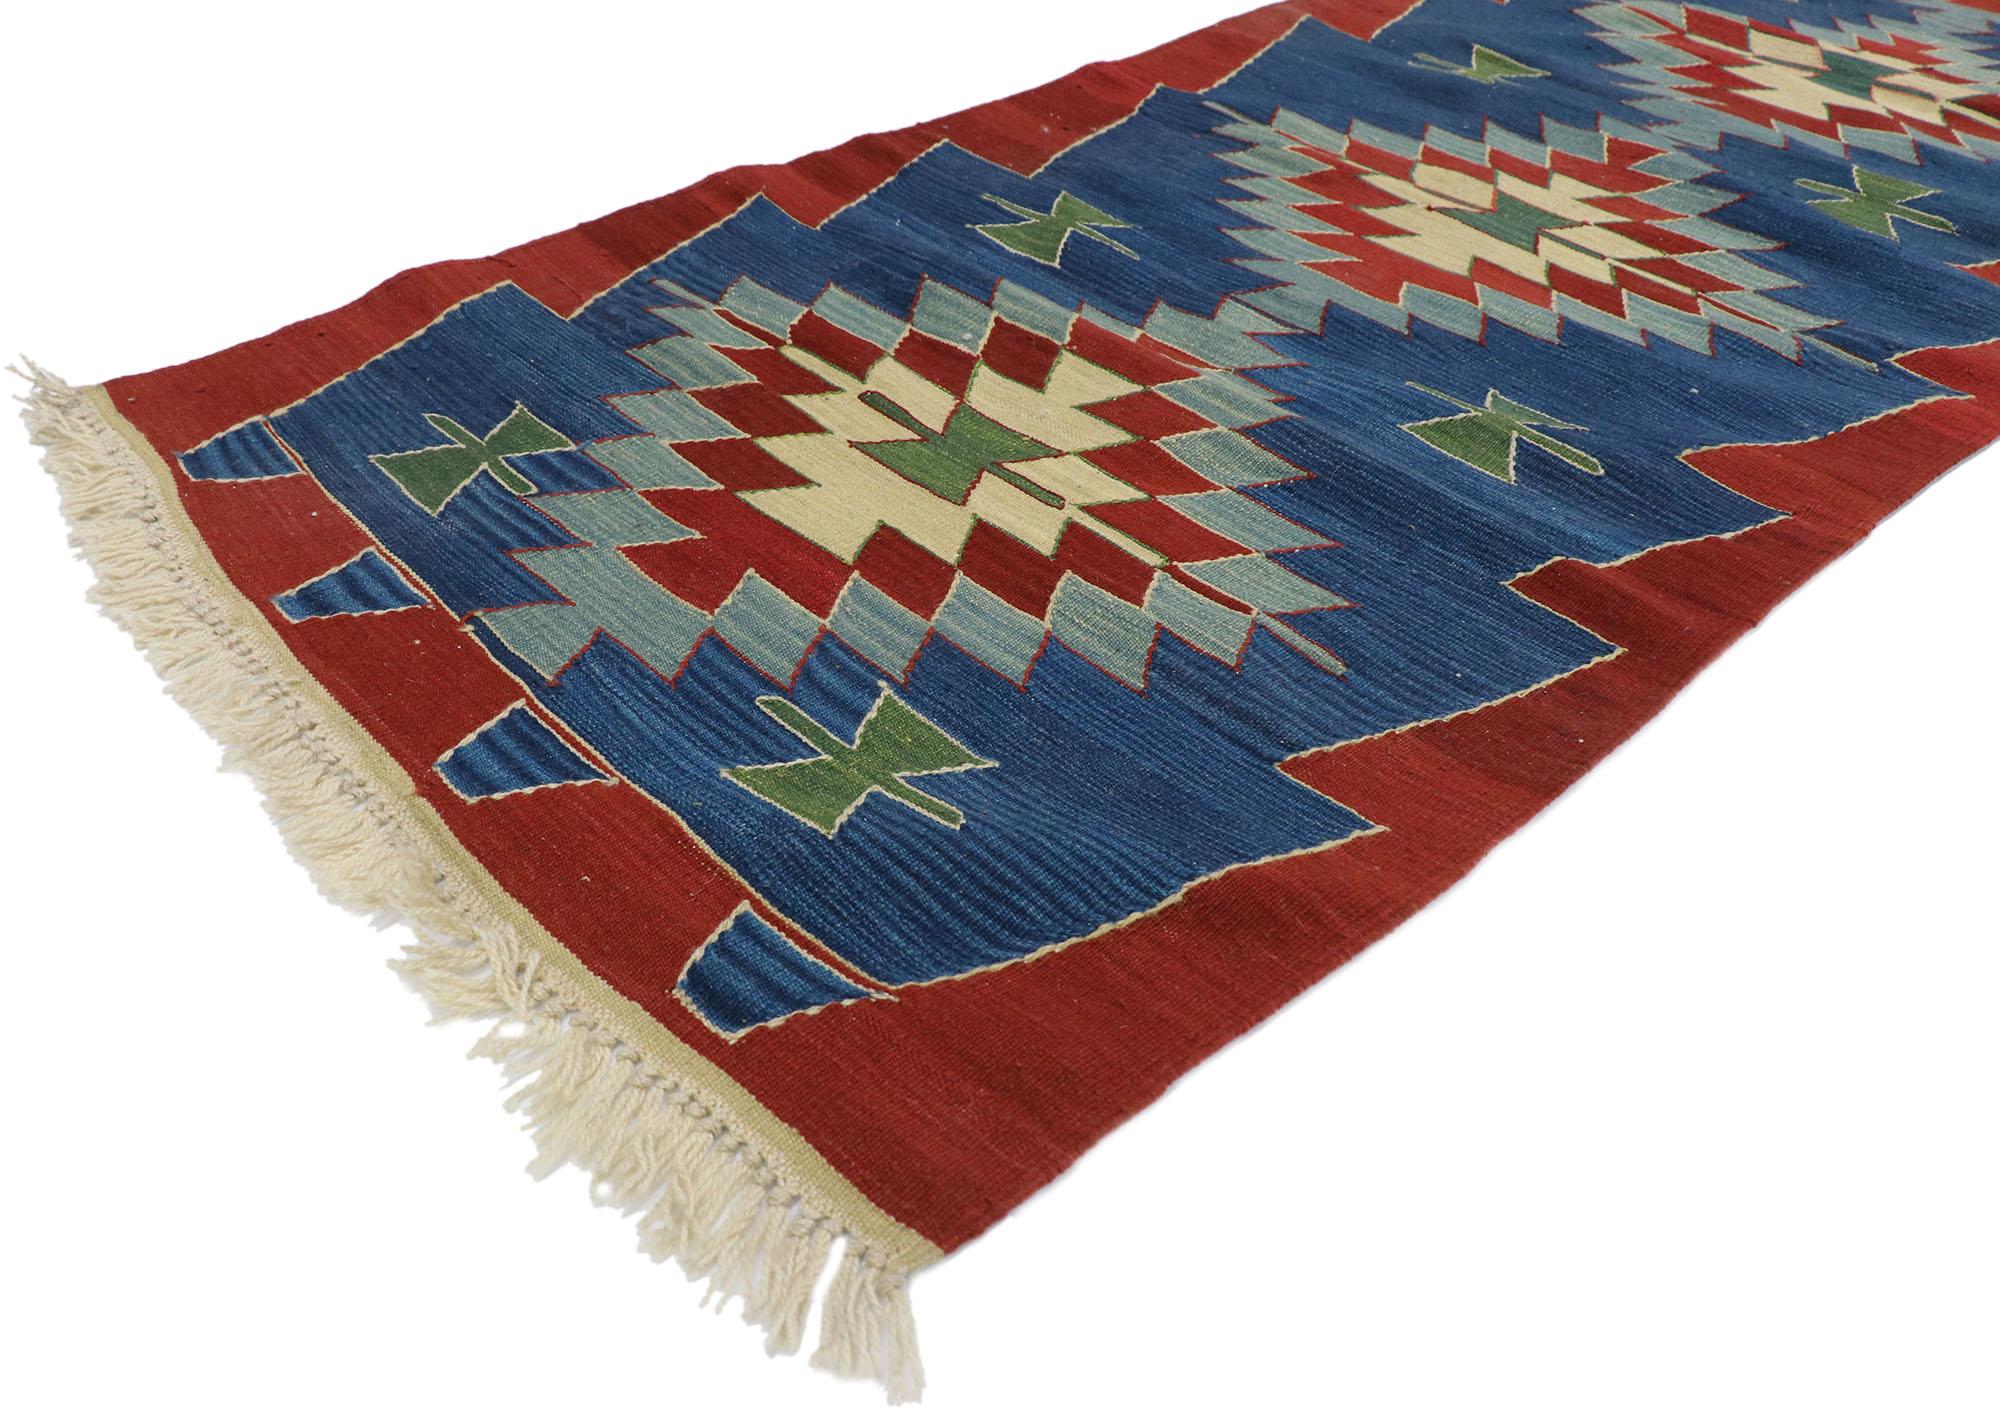 78047 vintage Persian Shiraz Kilim Runner with Tribal style 02'08 x 08'01. Full of tiny details and a bold expressive design combined with vibrant colors and tribal style, this hand-woven wool vintage Persian Shiraz kilim runner is a captivating